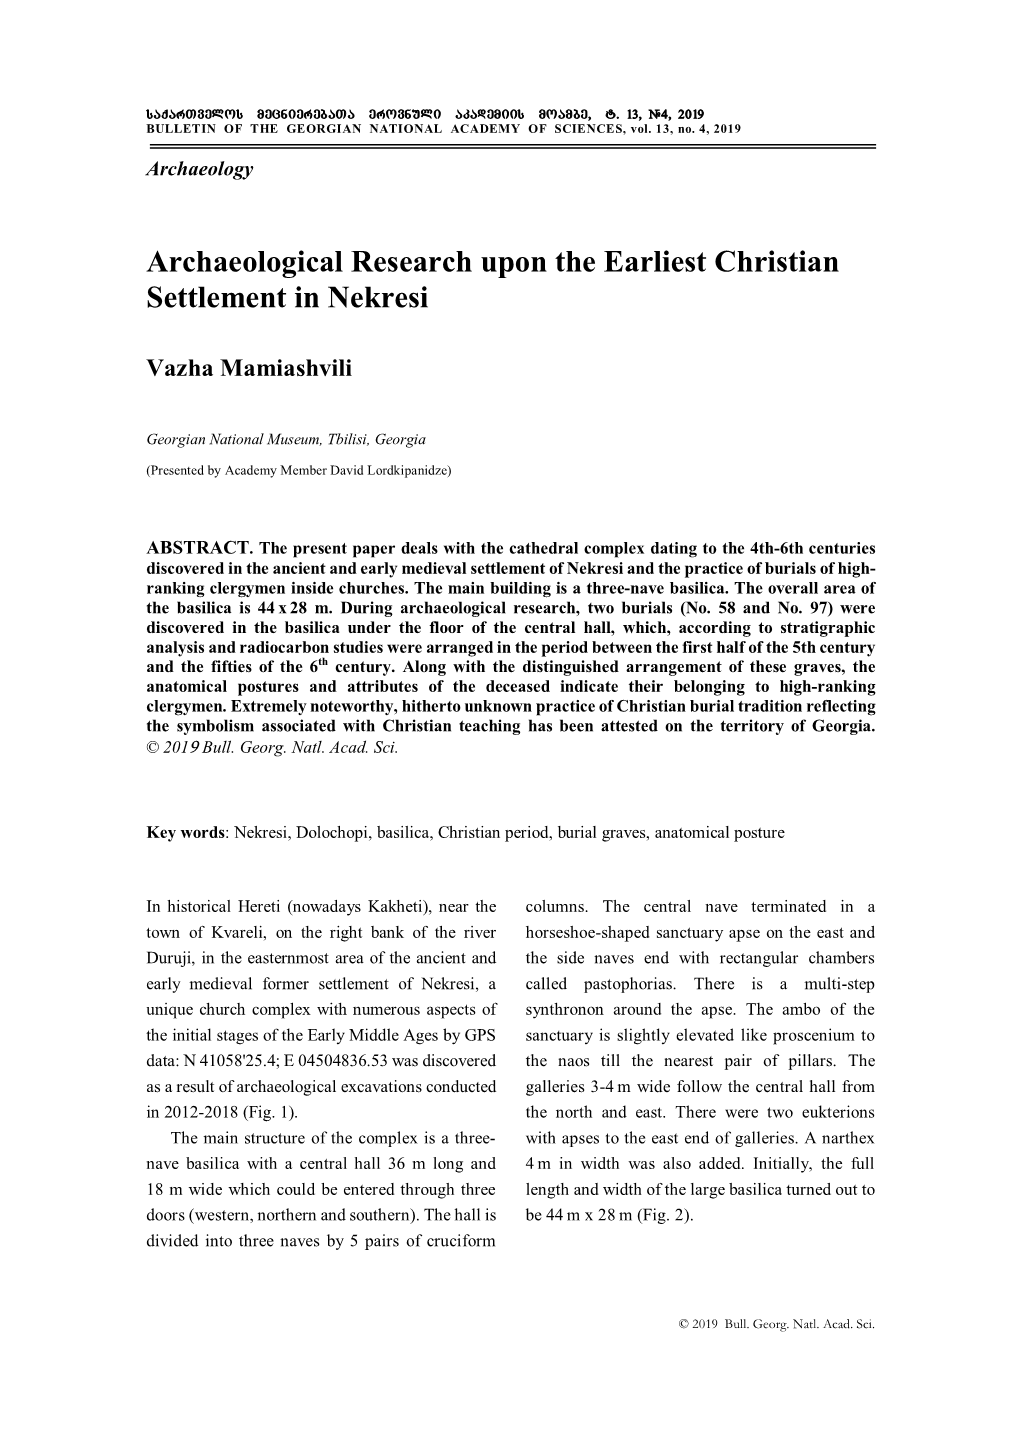 Archaeological Research Upon the Earliest Christian Settlement in Nekresi